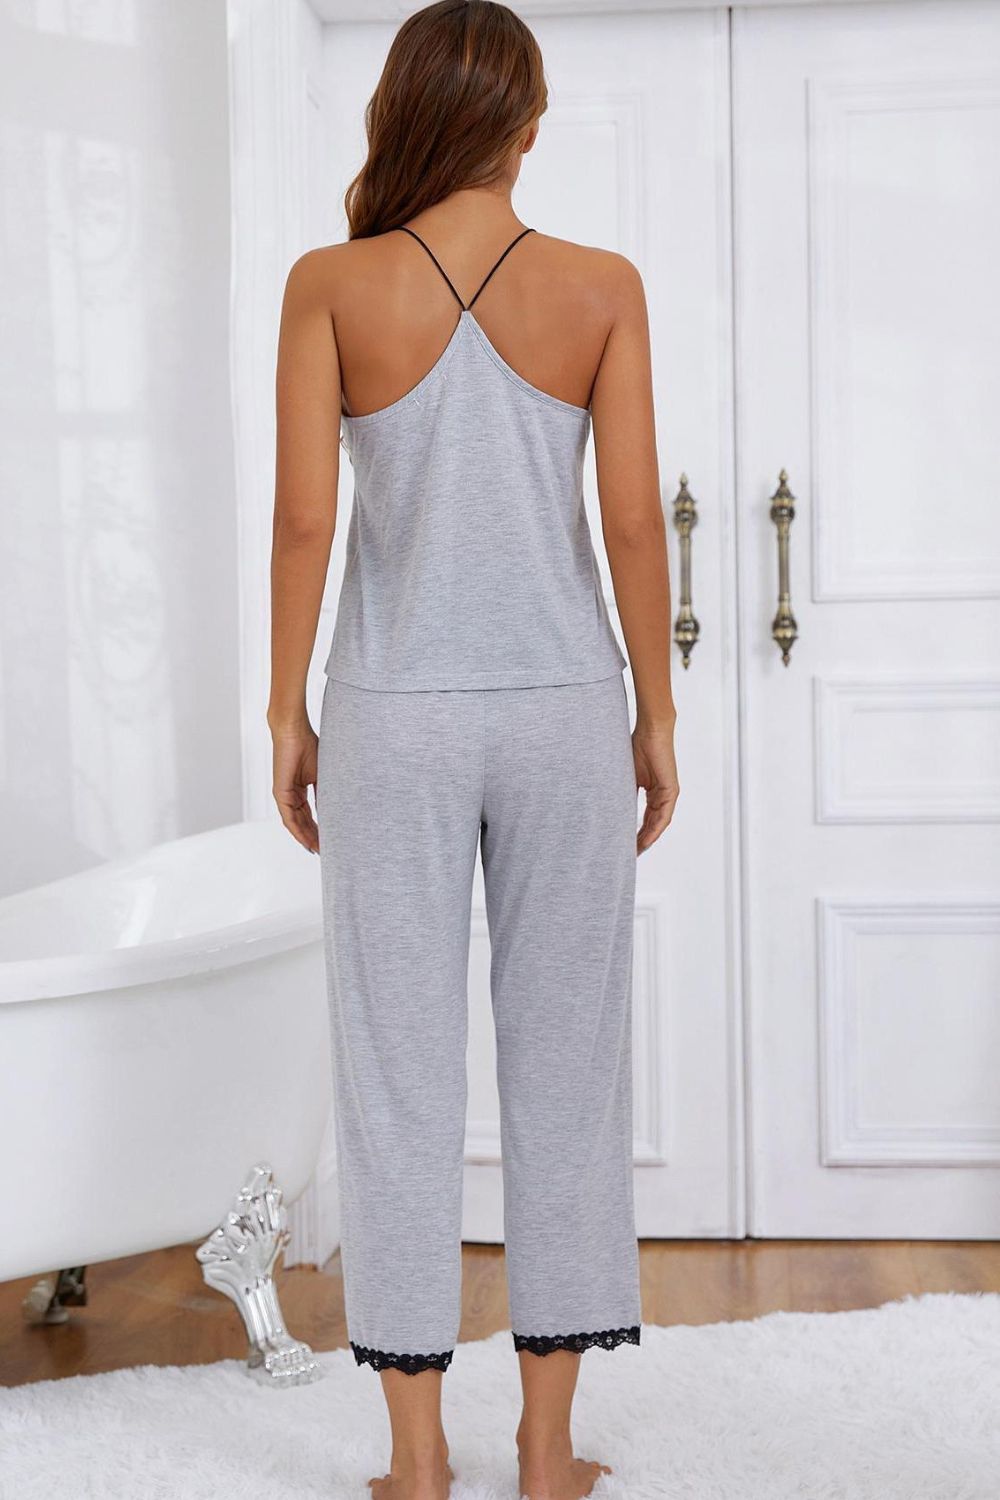 Halter Neck Cami and Lace Trim Pajama Set - Tophatter Deals and Online Shopping - Electronics, Jewelry, Beauty, Health, Gadgets, Fashion - Tophatter's Discounts & Offers - tophatters